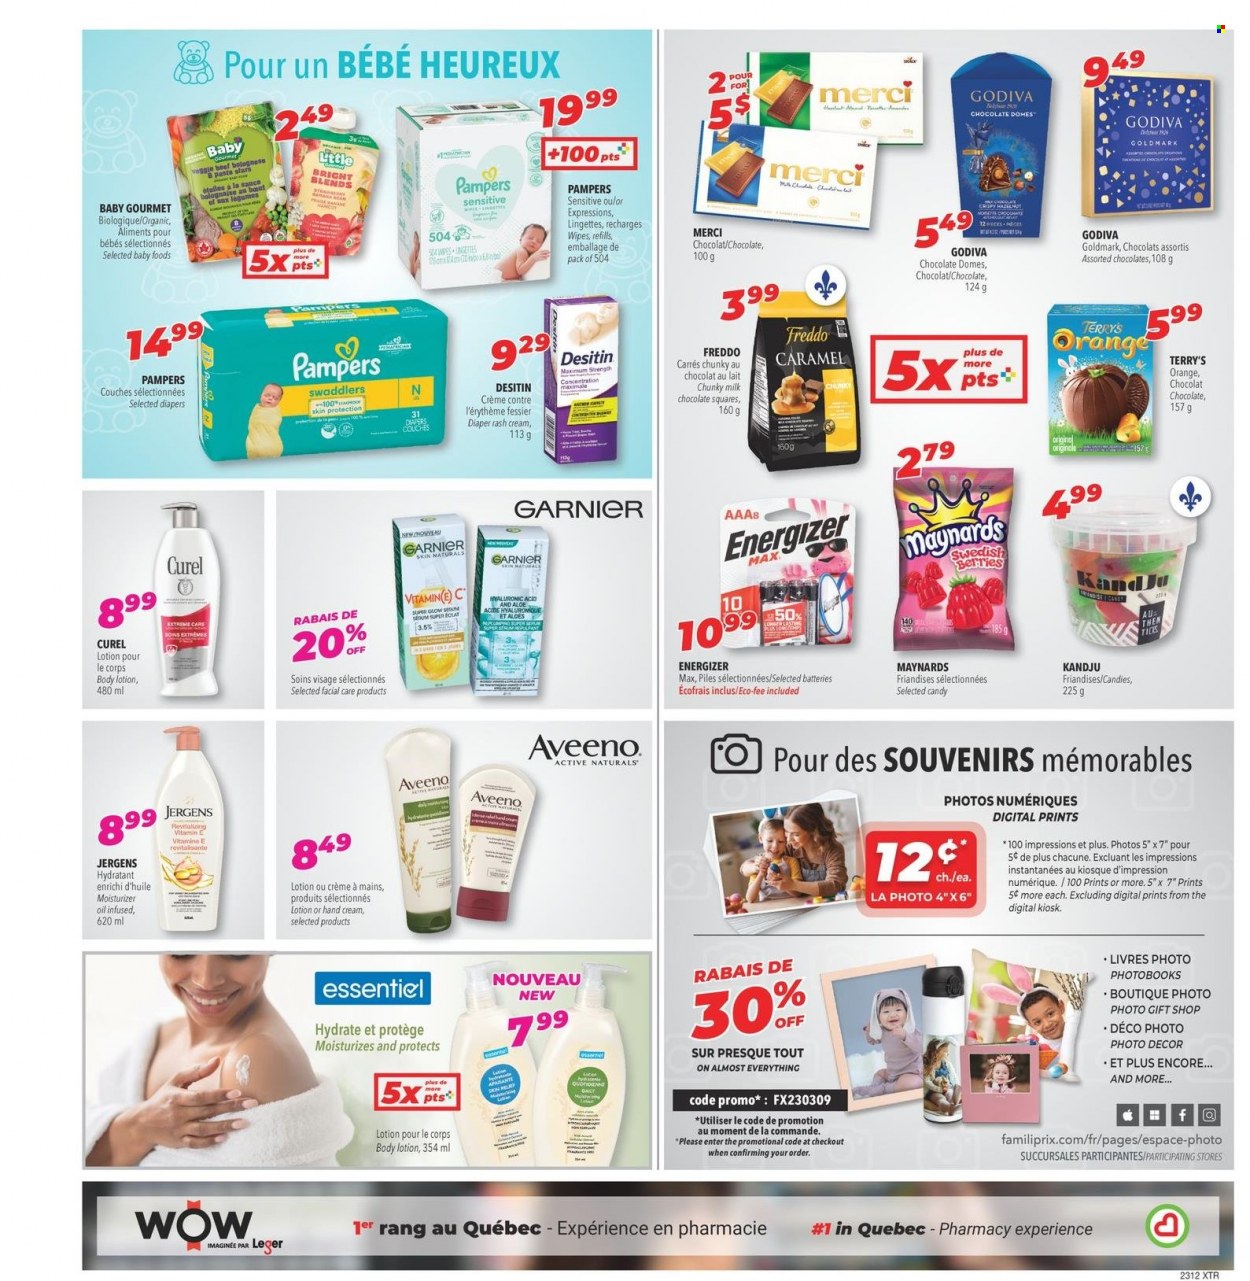 thumbnail - Familiprix Extra Flyer - March 16, 2023 - March 22, 2023 - Sales products - milk chocolate, chocolate, Godiva, Merci, sauce, pasta, caramel, oil, wipes, Pampers, nappies, Aveeno, moisturizer, serum, Curél, body lotion, hand cream, Jergens, Eclat, battery, Desitin, Energizer, Garnier. Page 17.